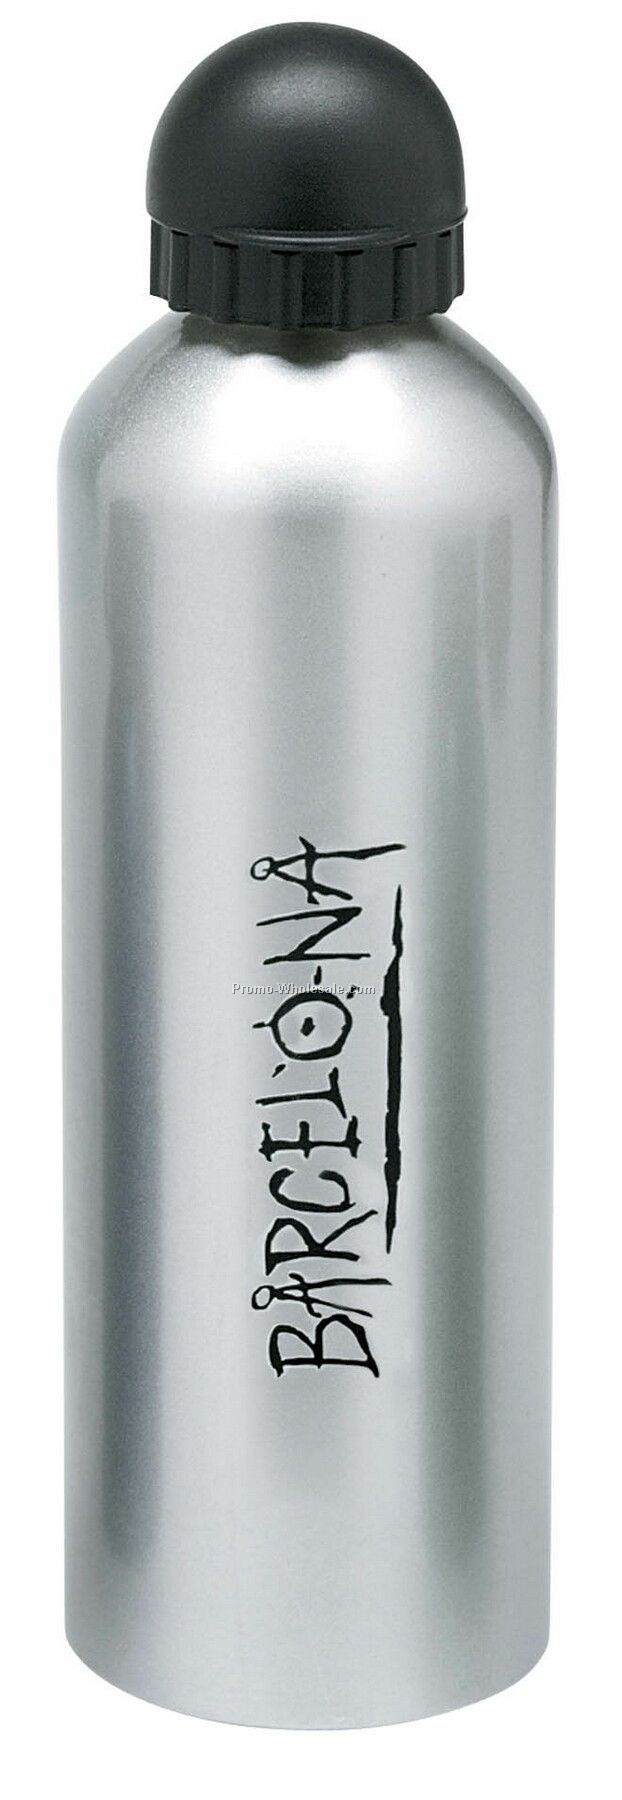 Giftcor 1 Liter Blue Aluminum Sport Flask II W/ Dome Sports Top